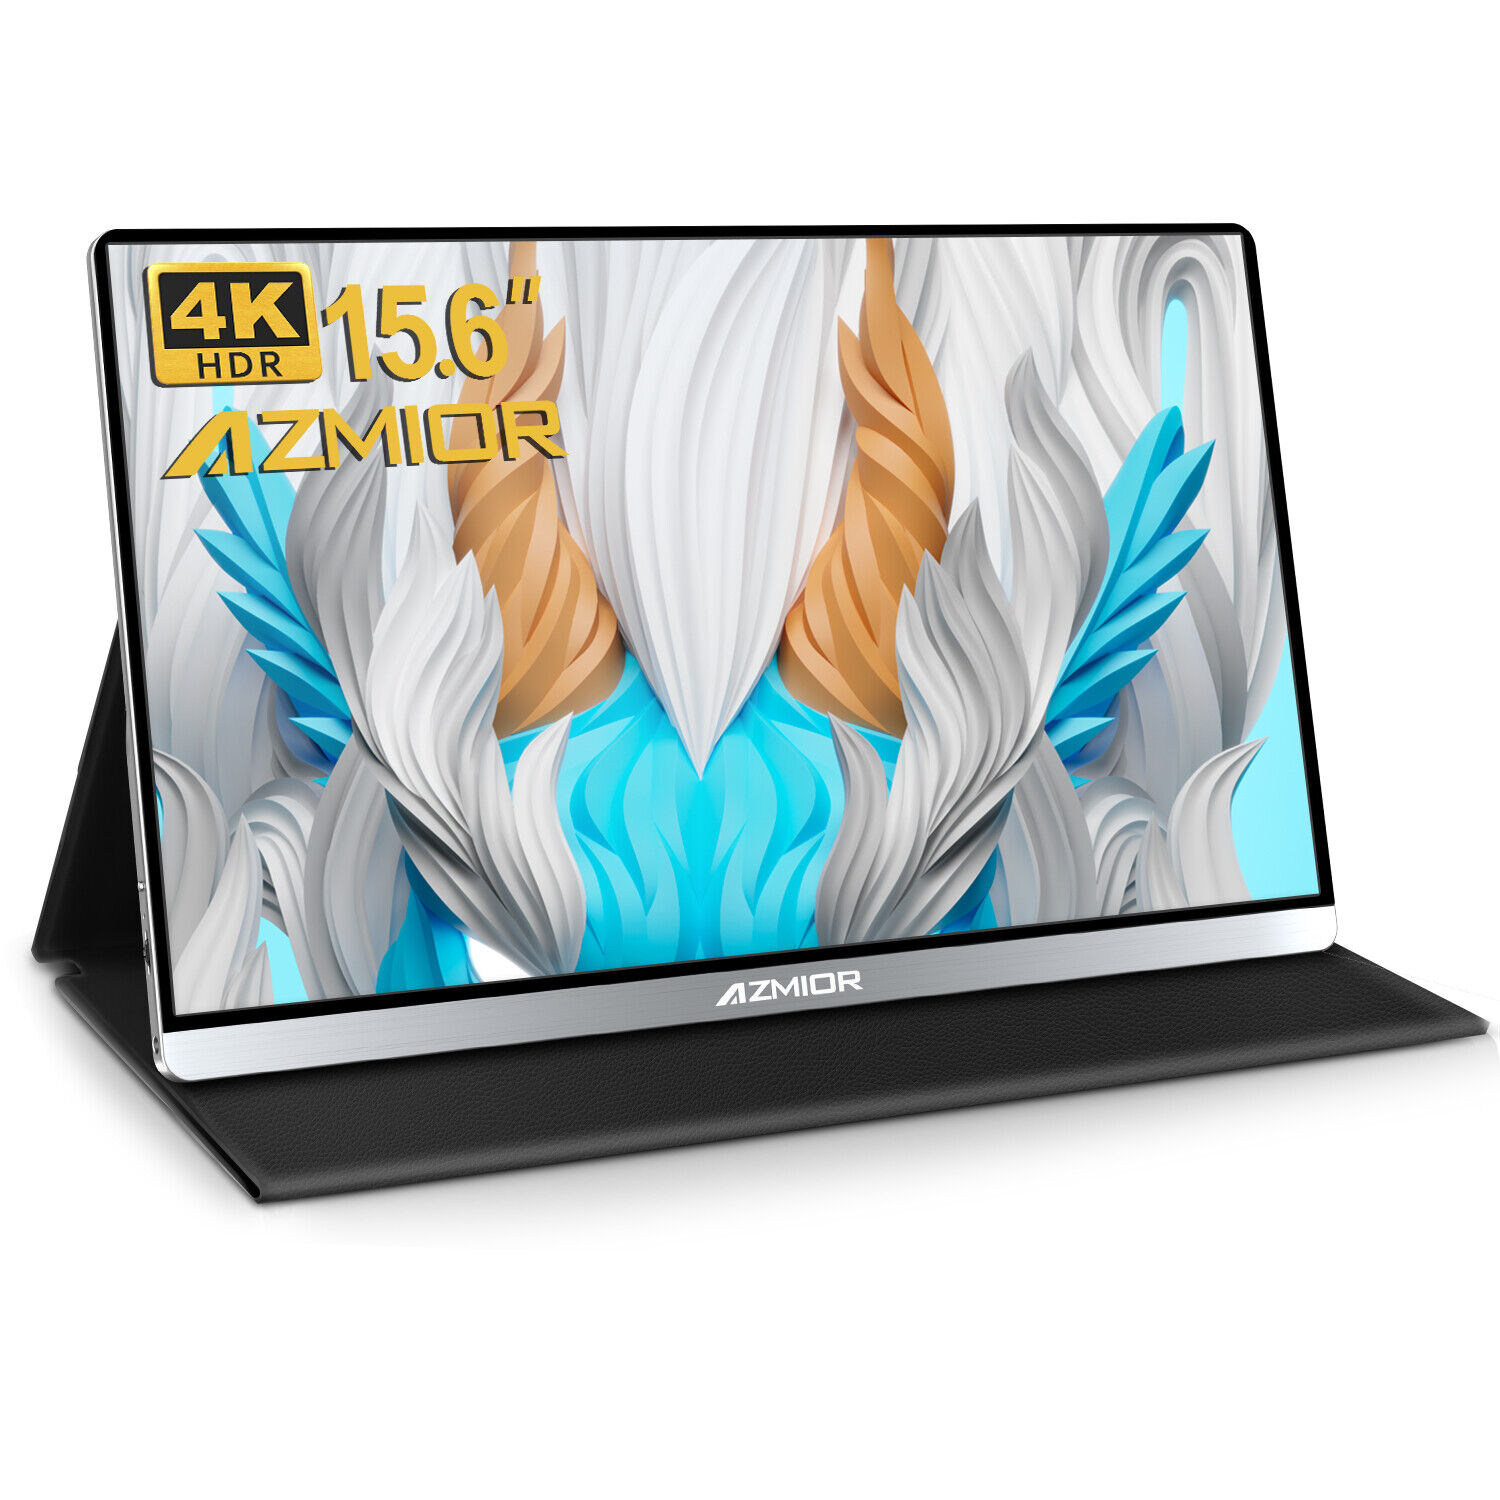 UPERFECT 15.6 inch 4K 3840x2160 HDR IPS Ultra Slim Portable Monitor & HD Input